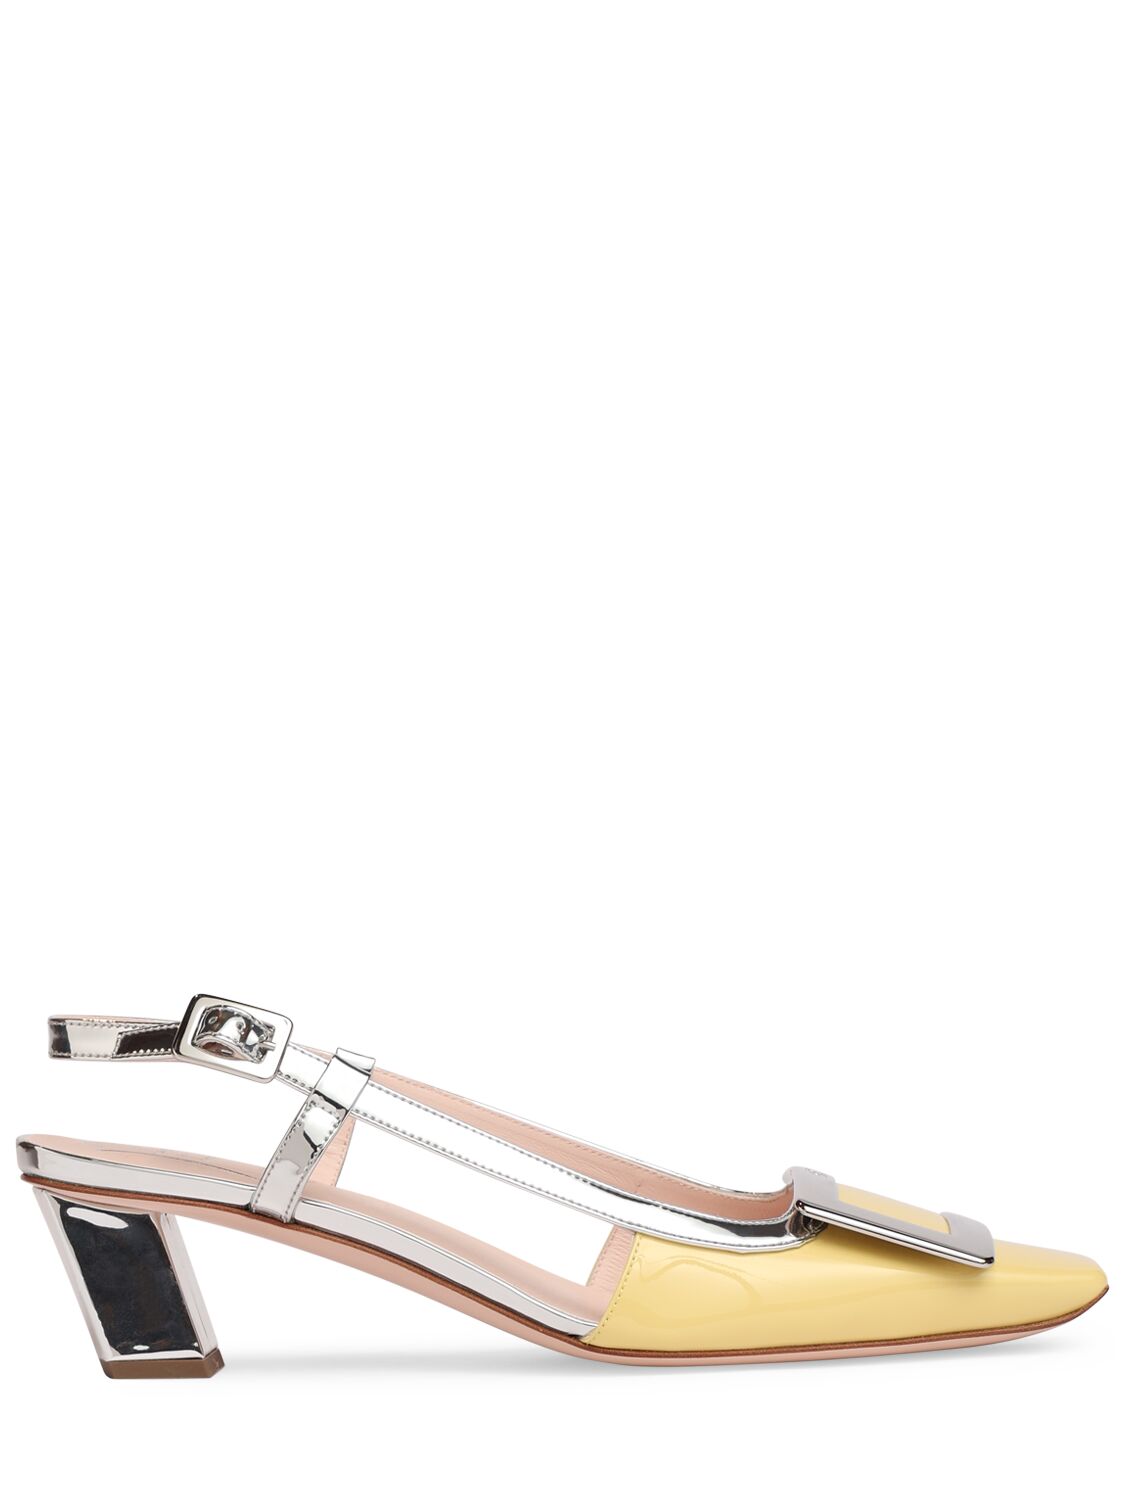 Roger Vivier 45mm Belle Vivier Patent Leather Pumps In Yellow,silver